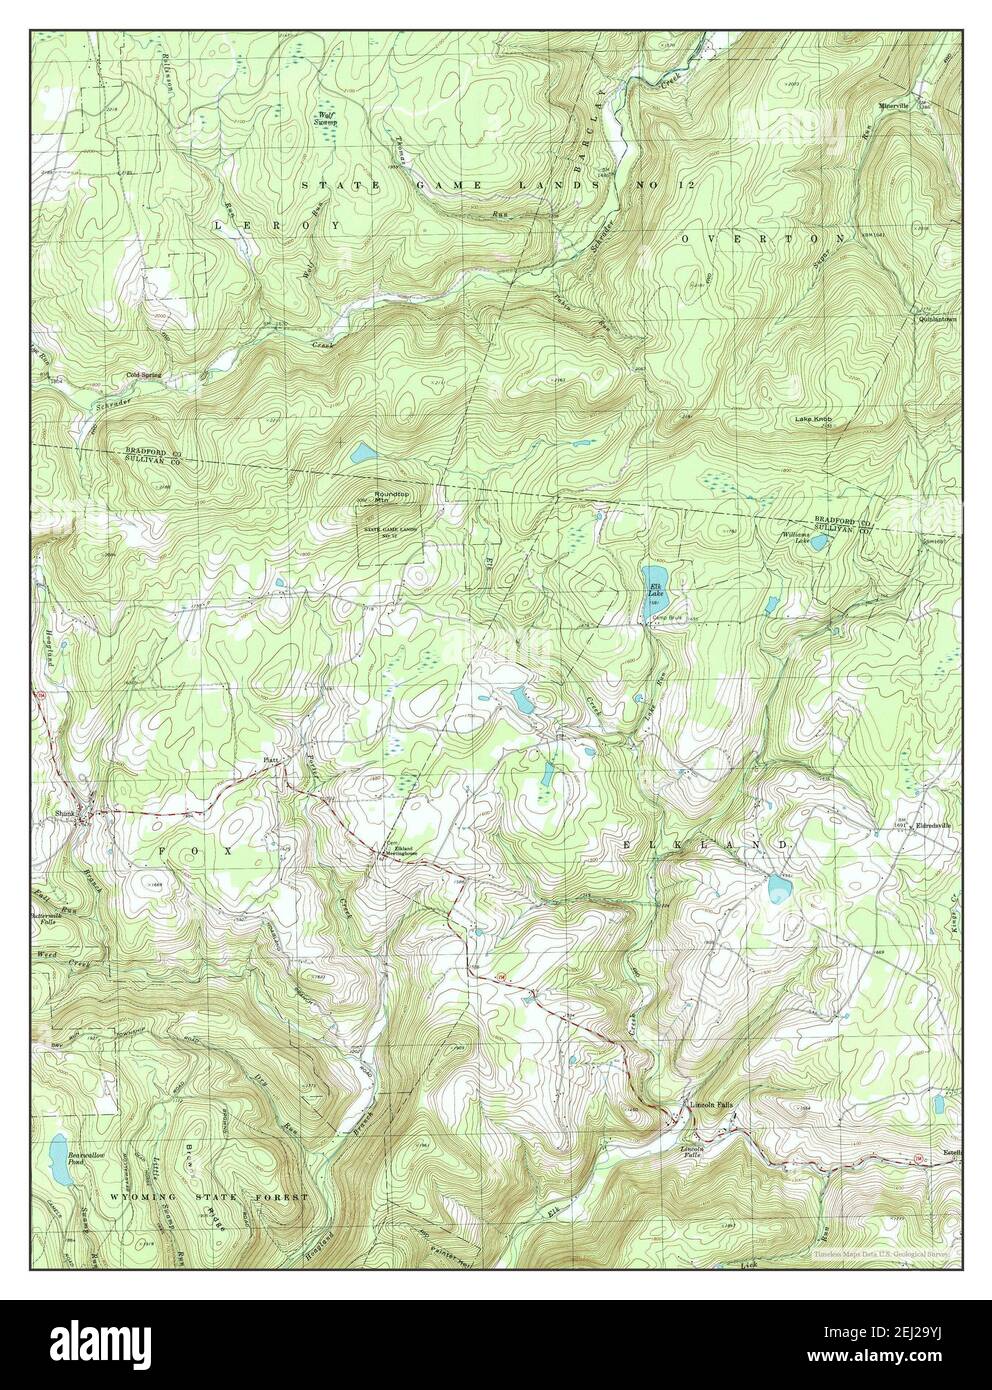 Shunk, Pennsylvania, map 1995, 1:24000, United States of America by Timeless Maps, data U.S. Geological Survey Stock Photo